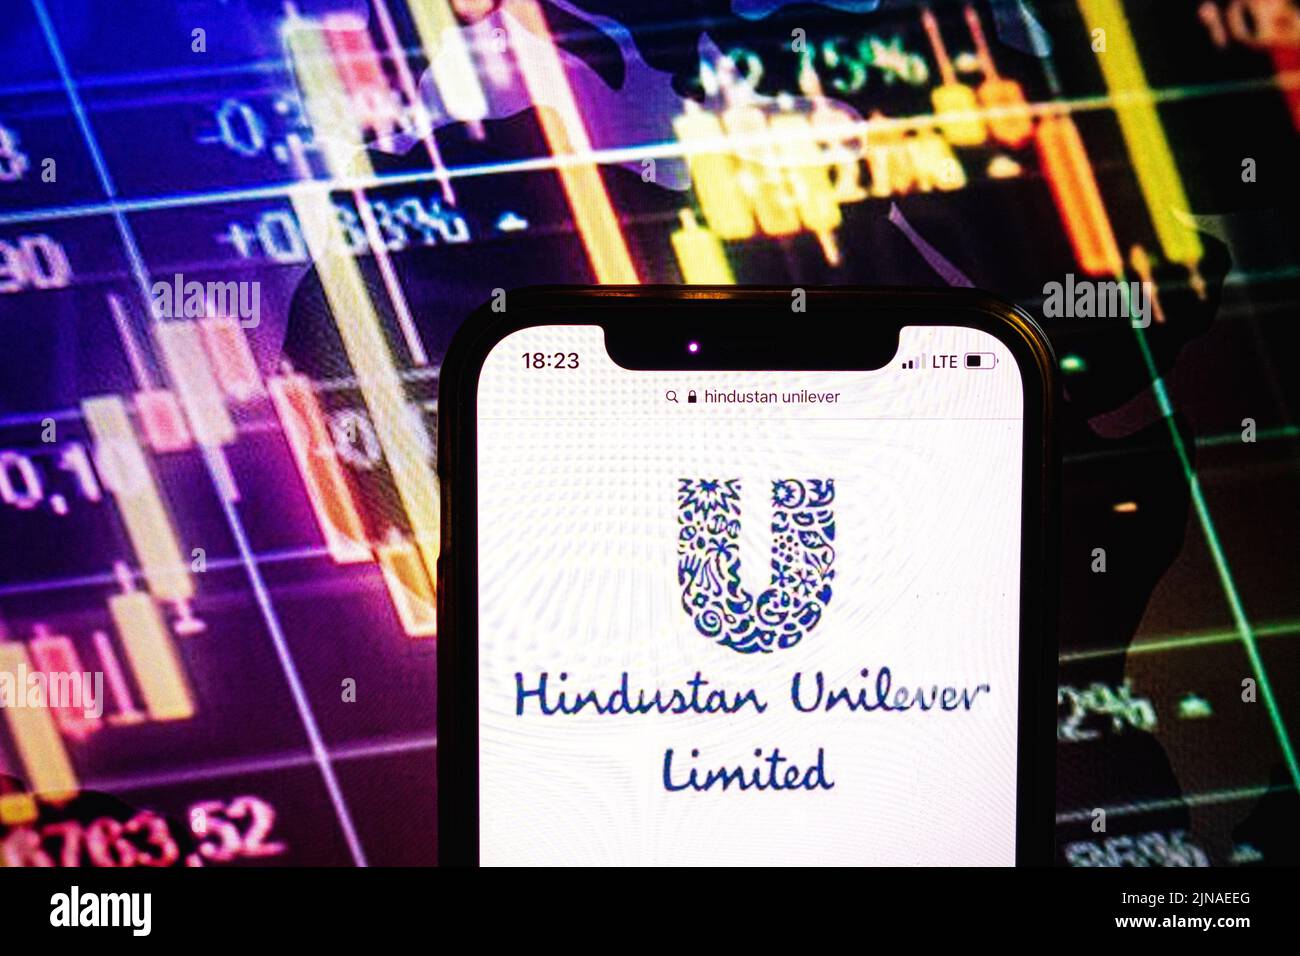 Hindustan Unilever: Know the history of the British-owned brand in India